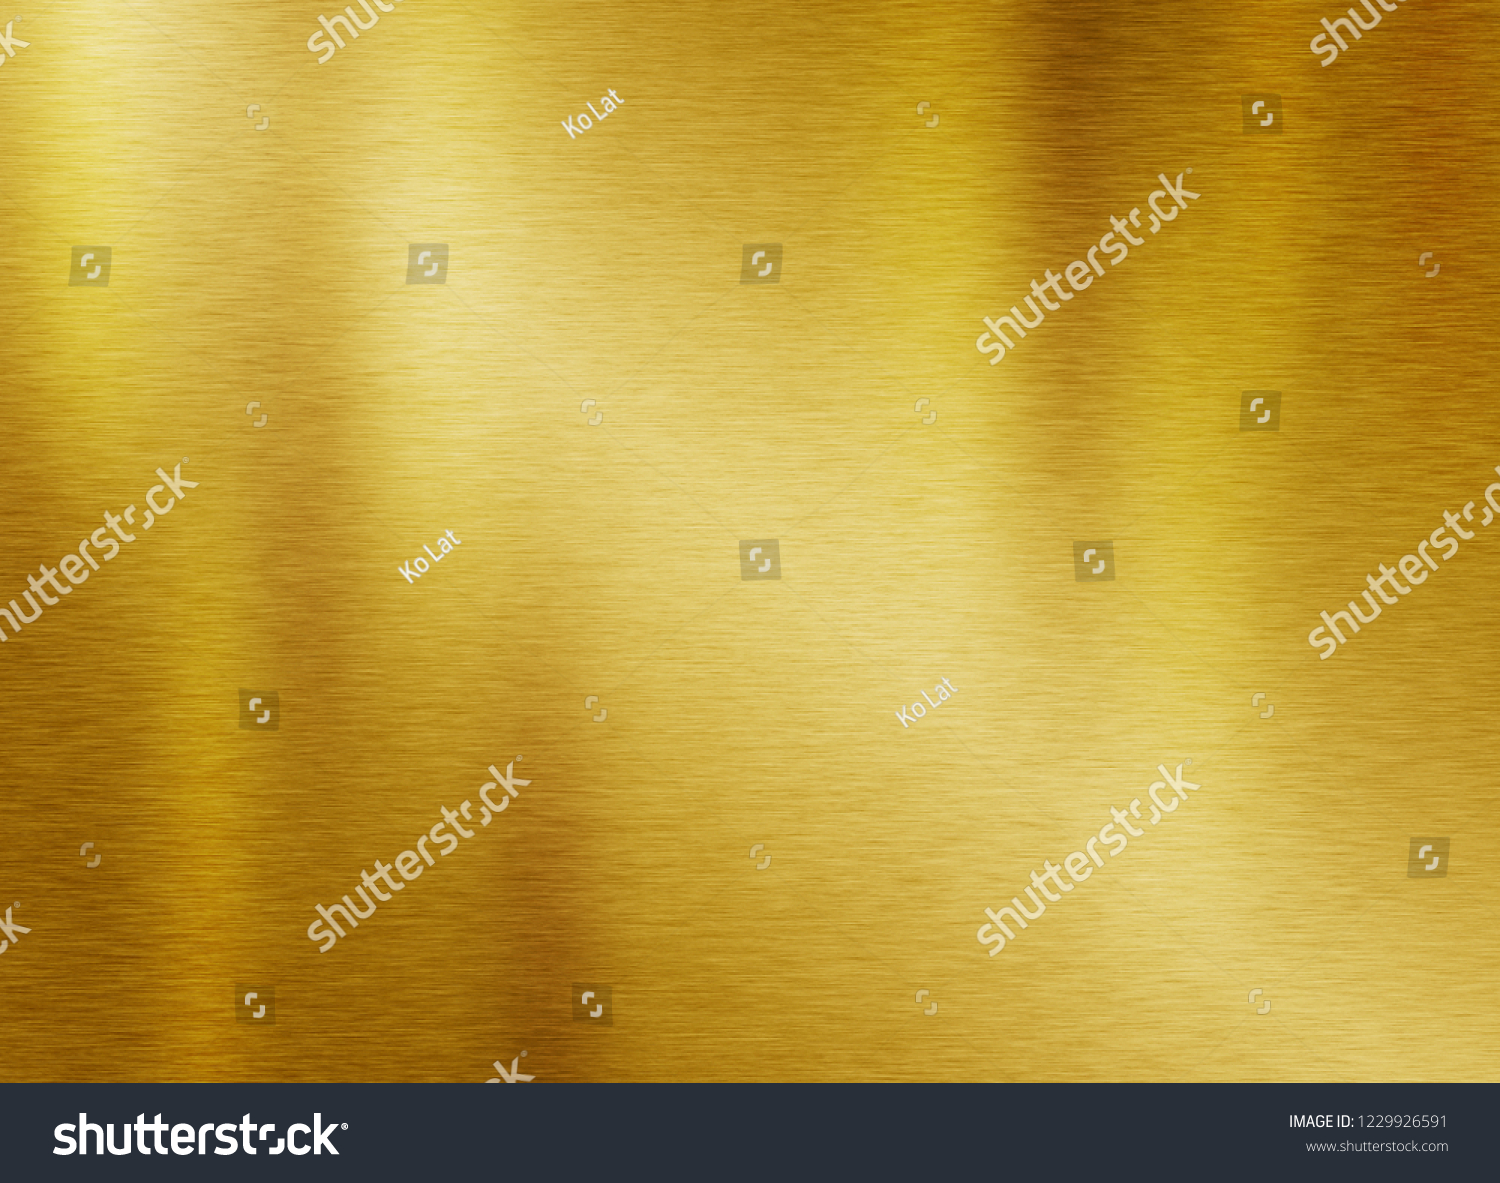 Gold metal texture background or yellow steel plate surface #1229926591